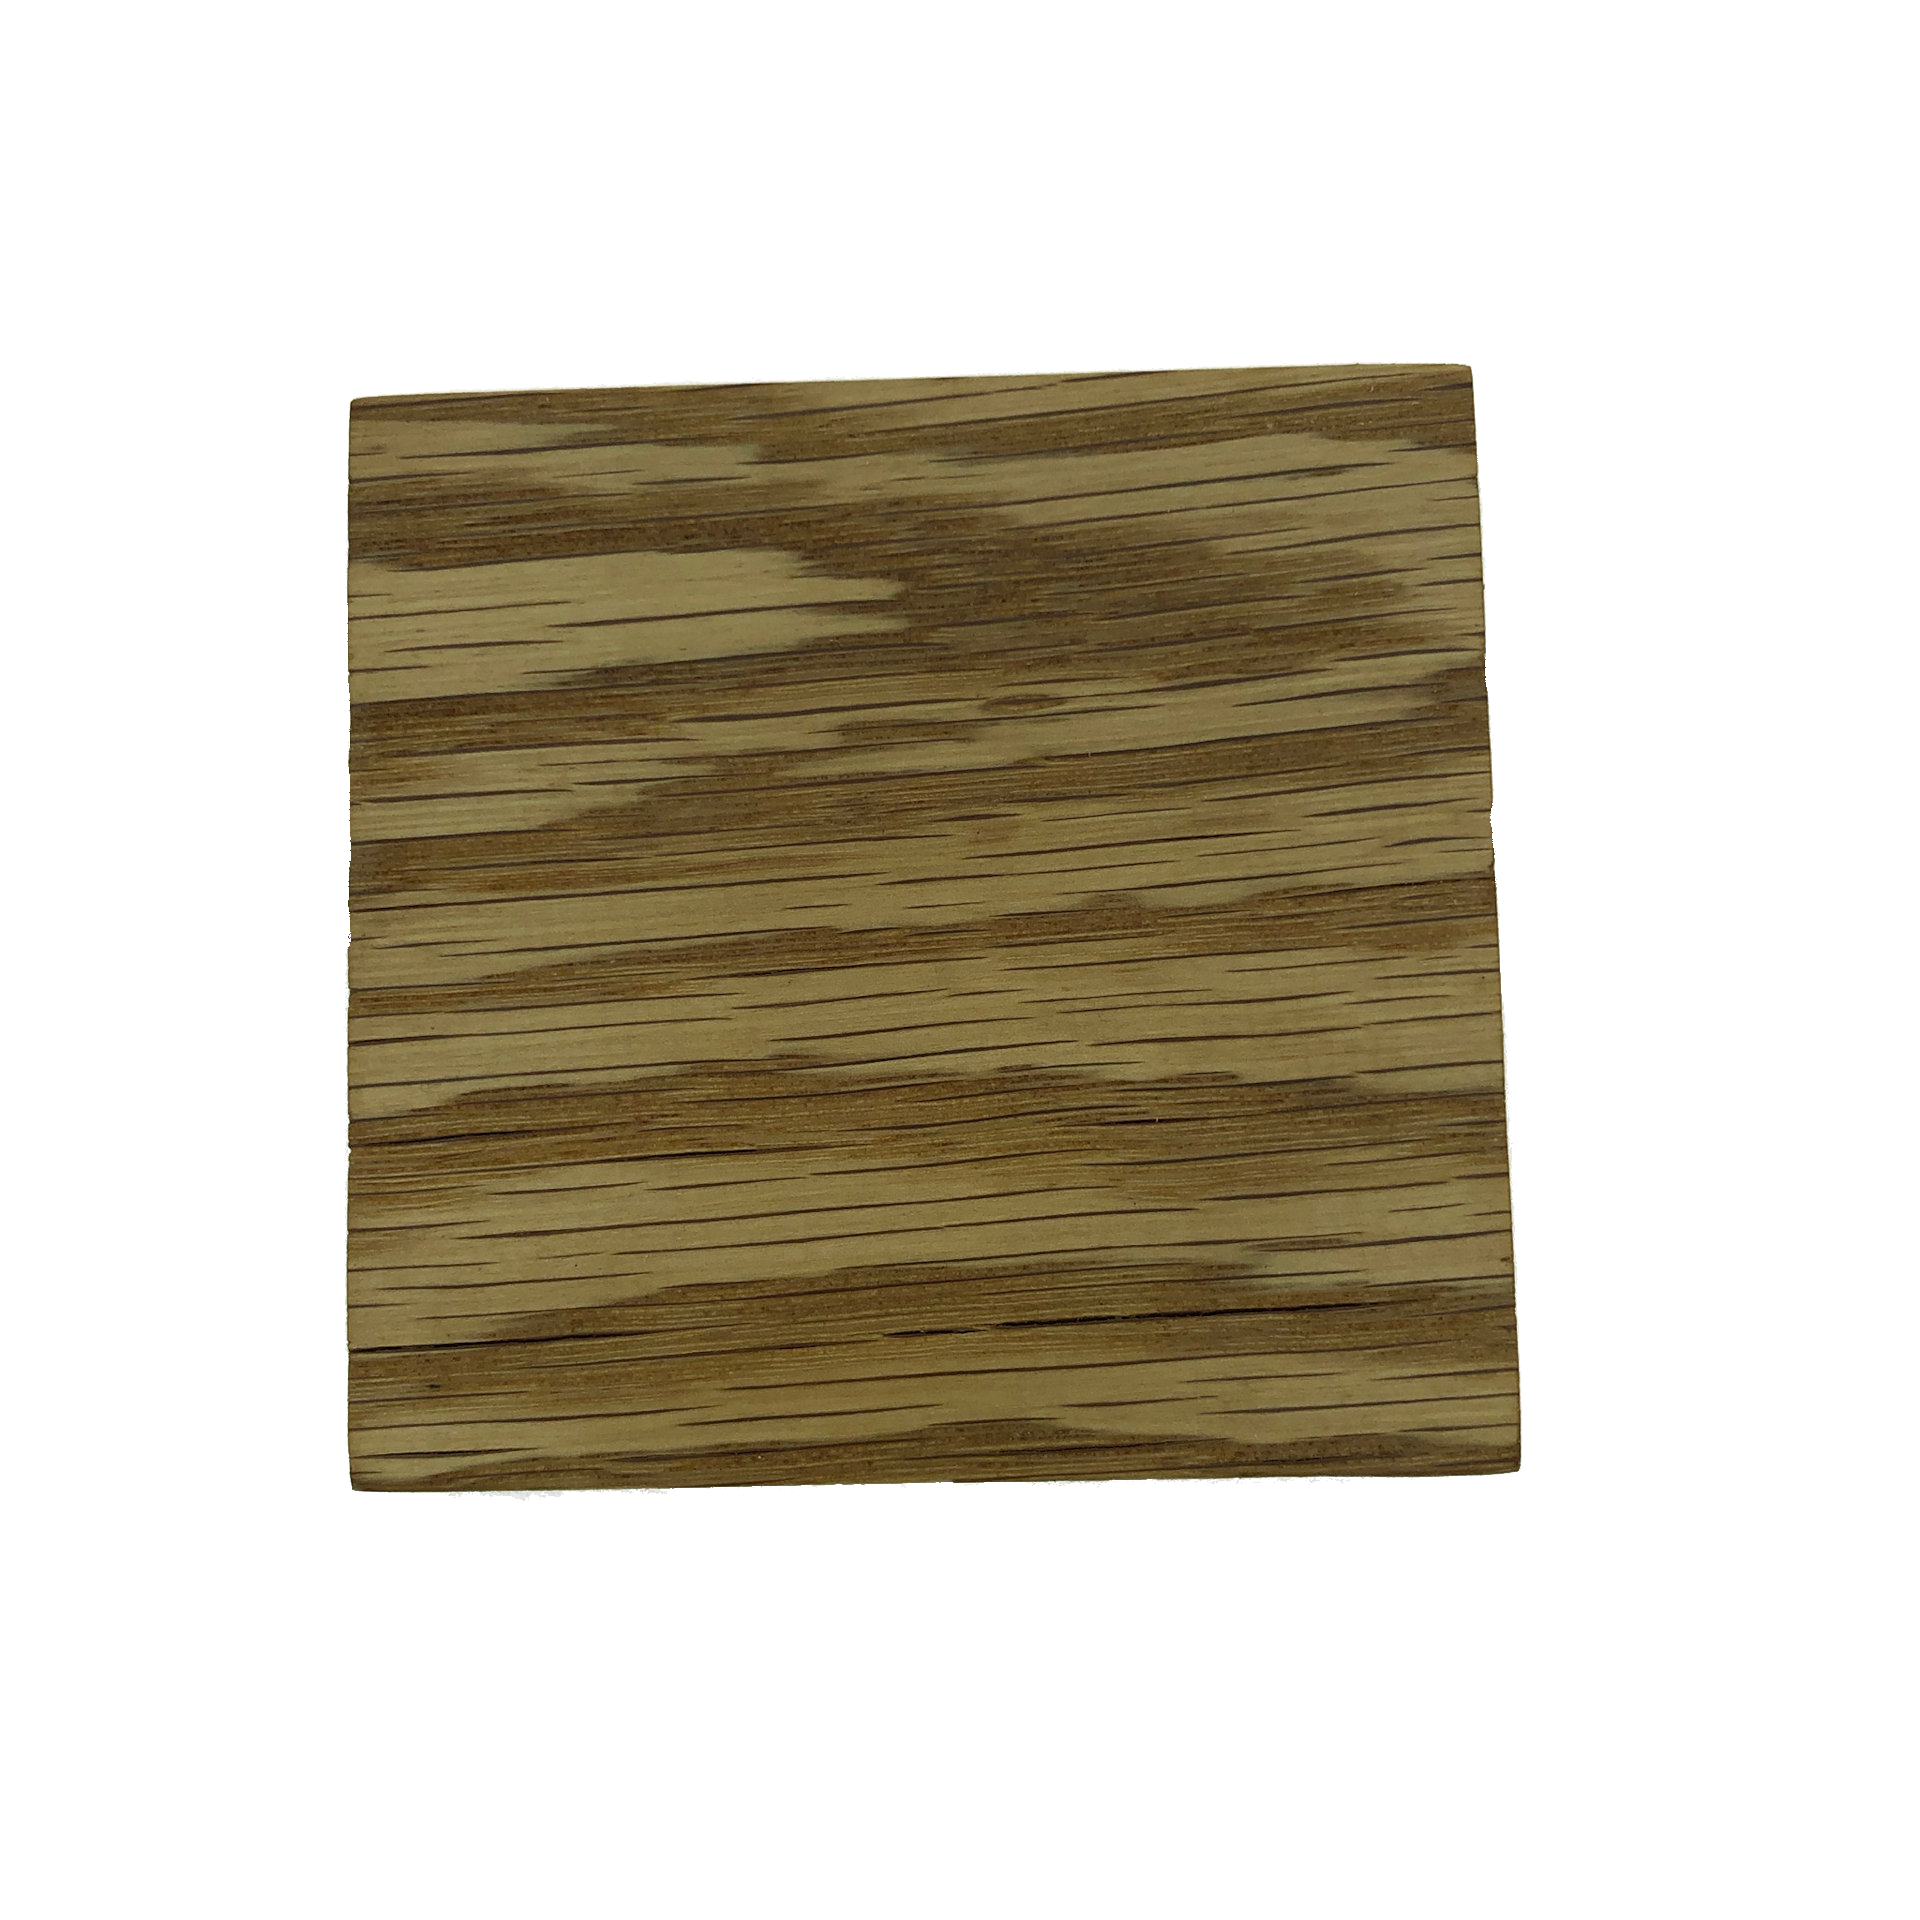 Handmade square wooden oak coasters - varnished and with non-slip feet